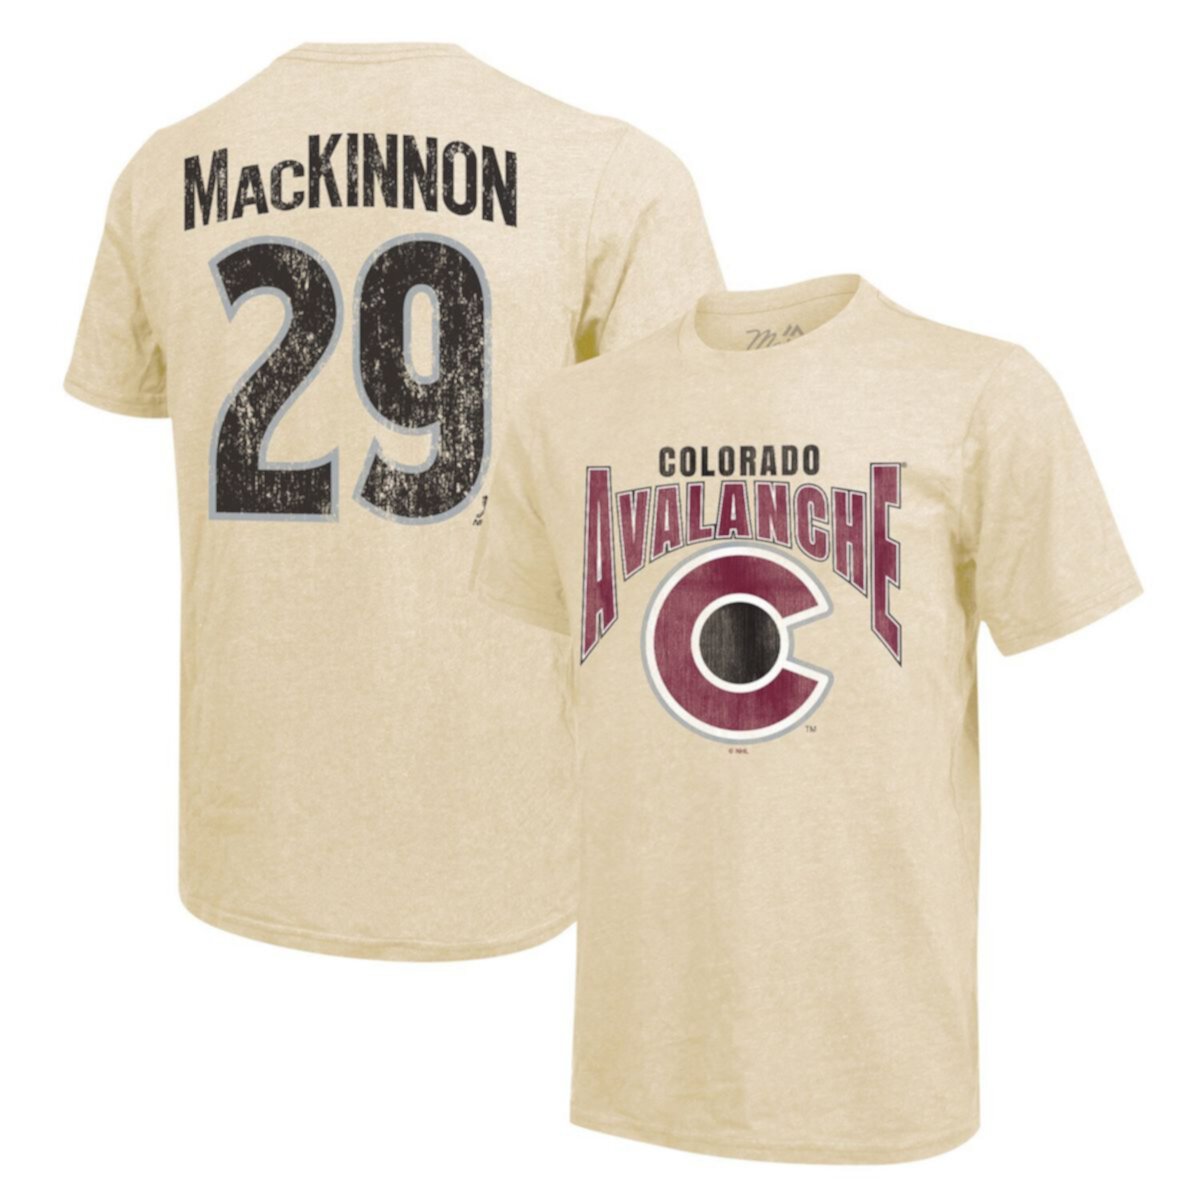 Men's Majestic Threads Nathan MacKinnon Cream Colorado Avalanche Dynasty Name & Number Tri-Blend T-Shirt Majestic Threads